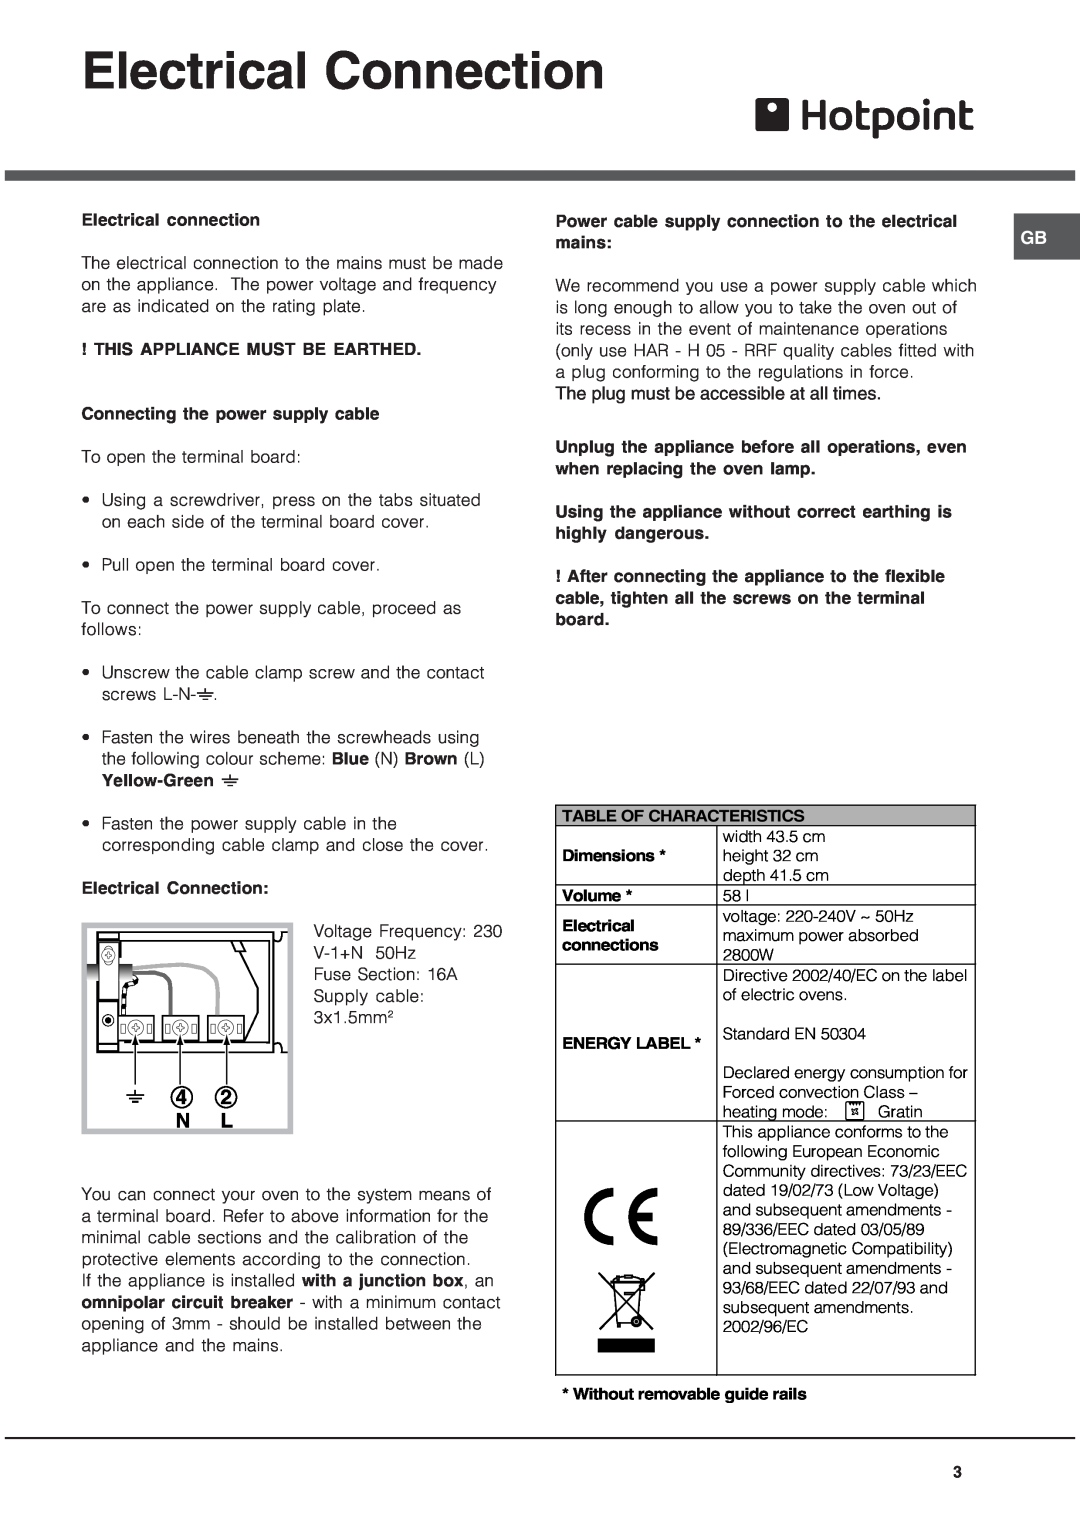 Hotpoint SE1022X manual Electrical Connection, 4 2 N L, The plug must be accessible at all times 